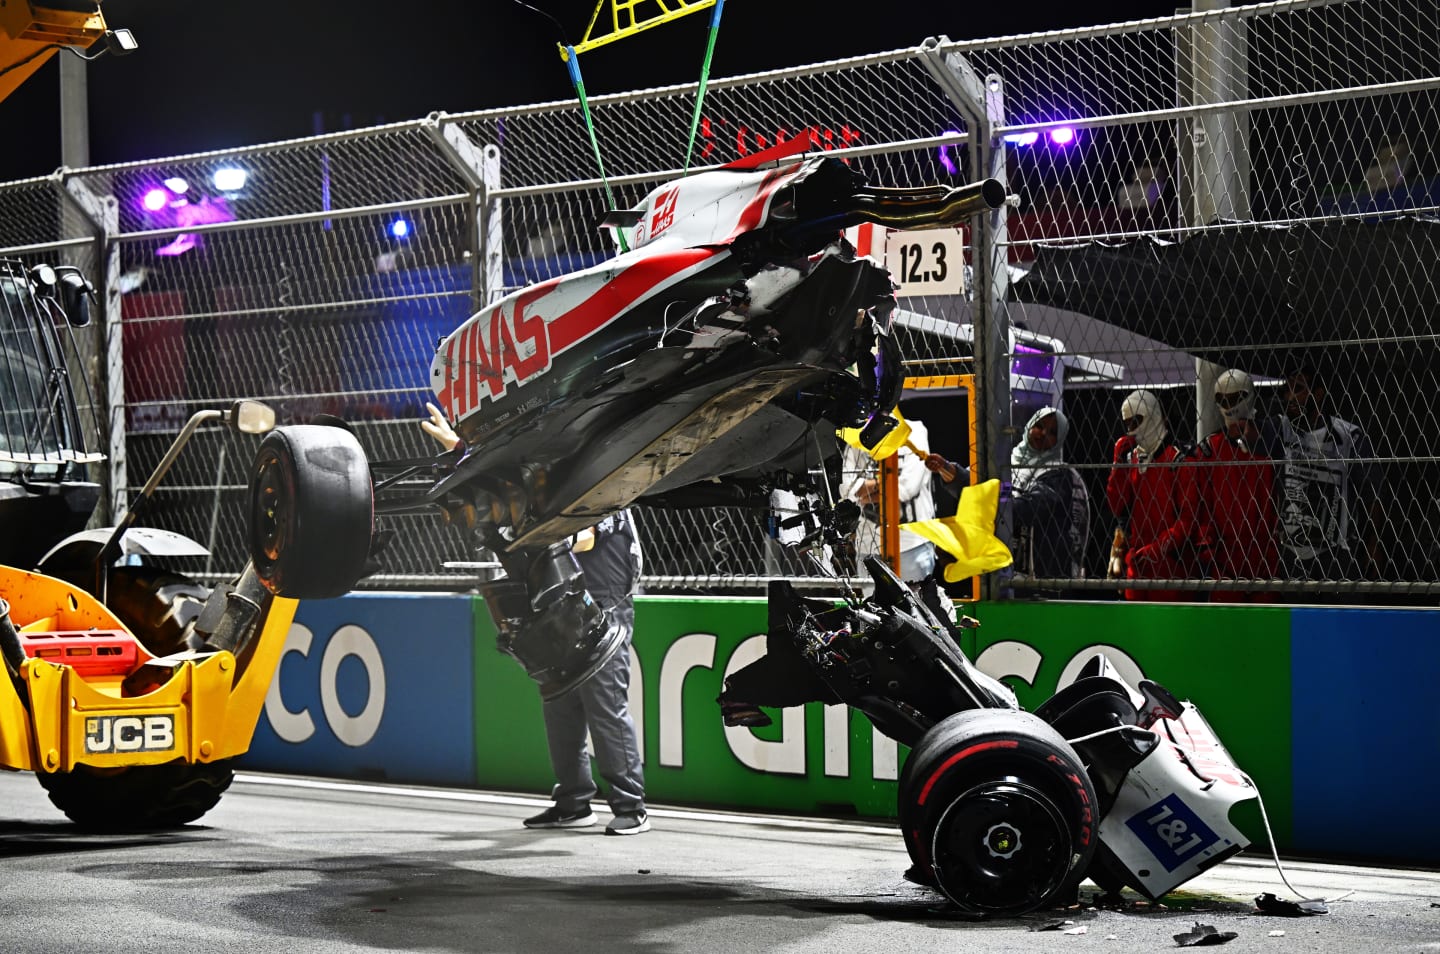 JEDDAH, SAUDI ARABIA - MARCH 26: Track marshals clean debris from the track following the crash of Mick Schumacher of Germany and Haas F1 during qualifying ahead of the F1 Grand Prix of Saudi Arabia at the Jeddah Corniche Circuit on March 26, 2022 in Jeddah, Saudi Arabia. (Photo by Clive Mason/Getty Images)